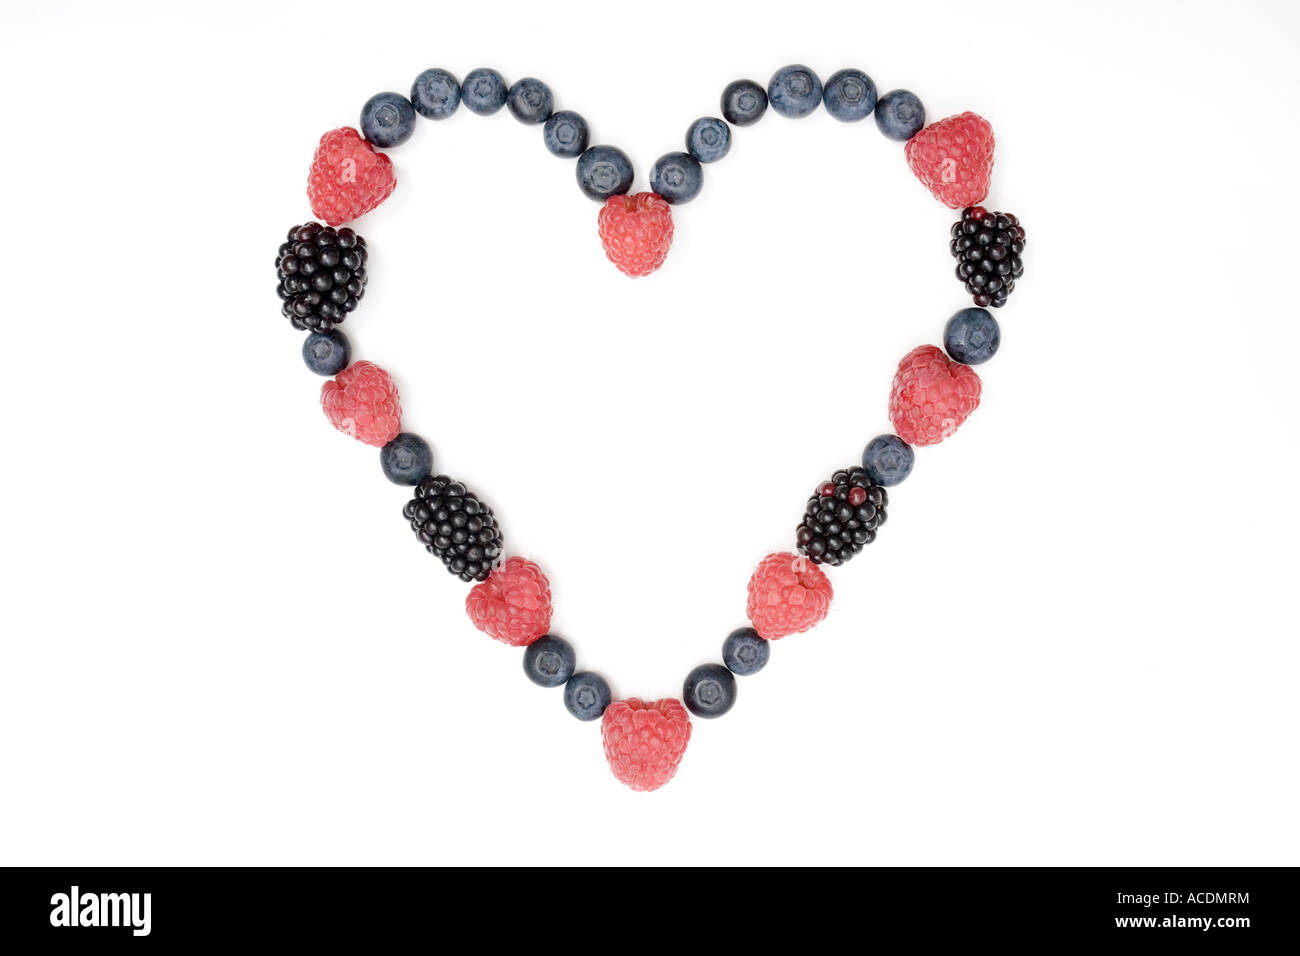 Berry heart made from English summer berries on a white background Stock Photo